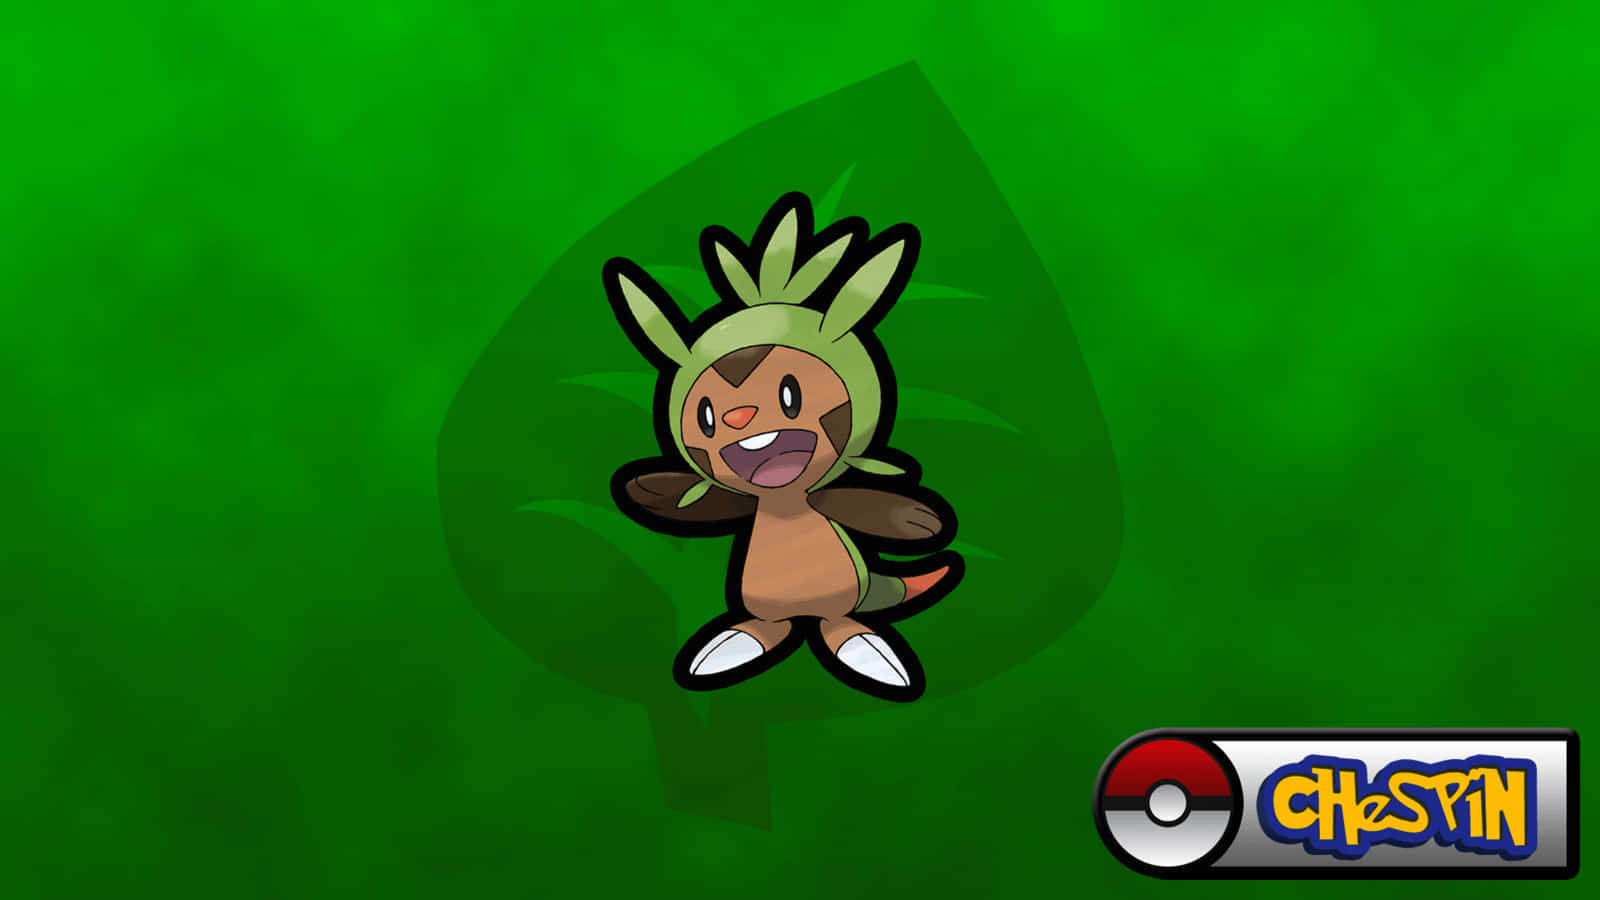 Chespin Against Green Leaf Wallpaper